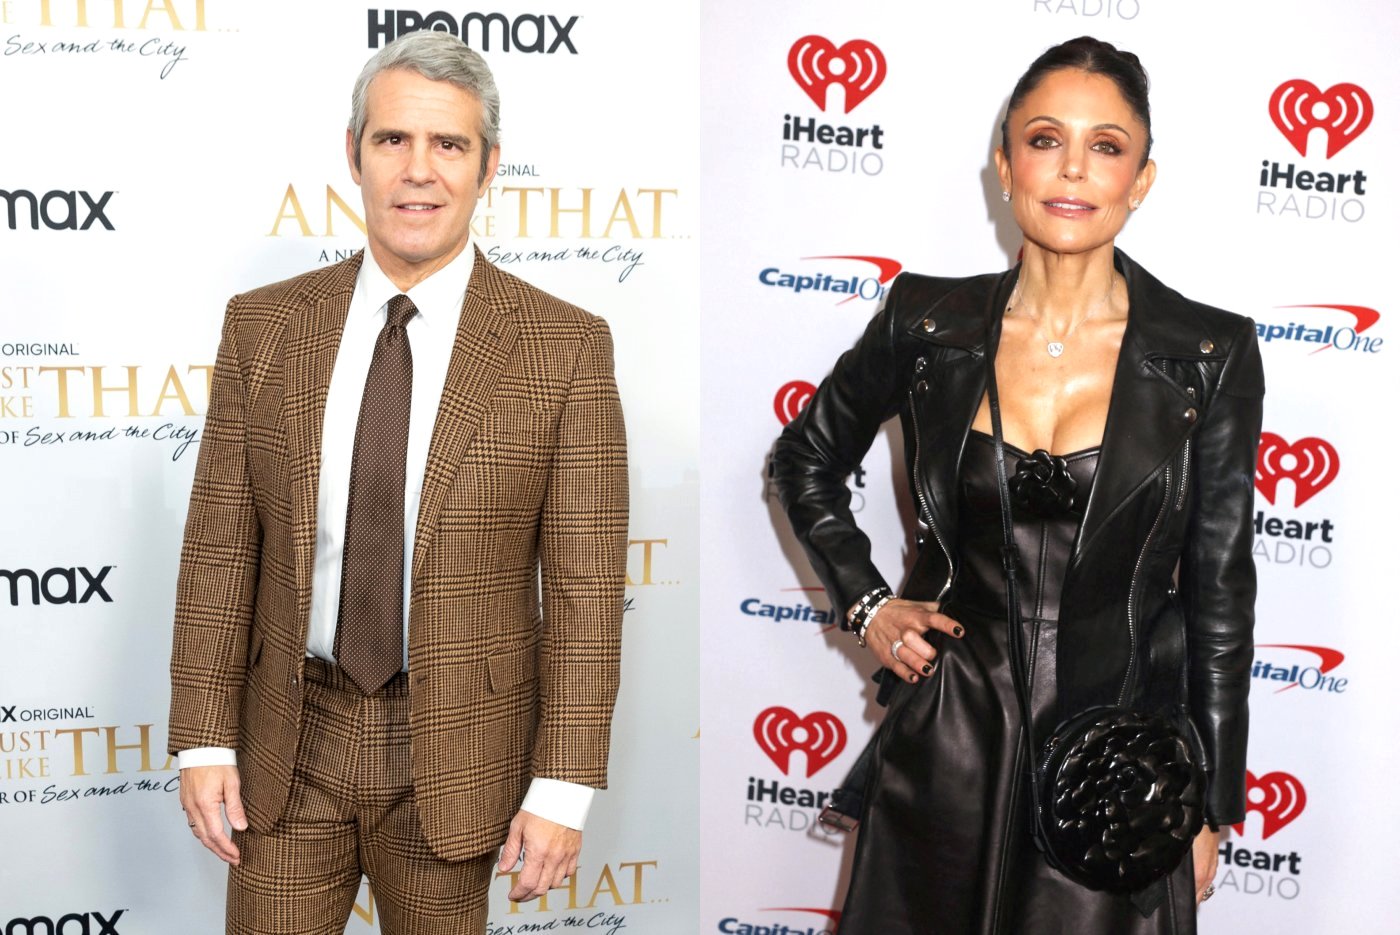 Andy Cohen Seemingly Shades Bethenny Frankel as “Hypocritical” as RHONY Alum Slams Their Friendship, & Suggests Andy Has “Resentment” Toward Her Success